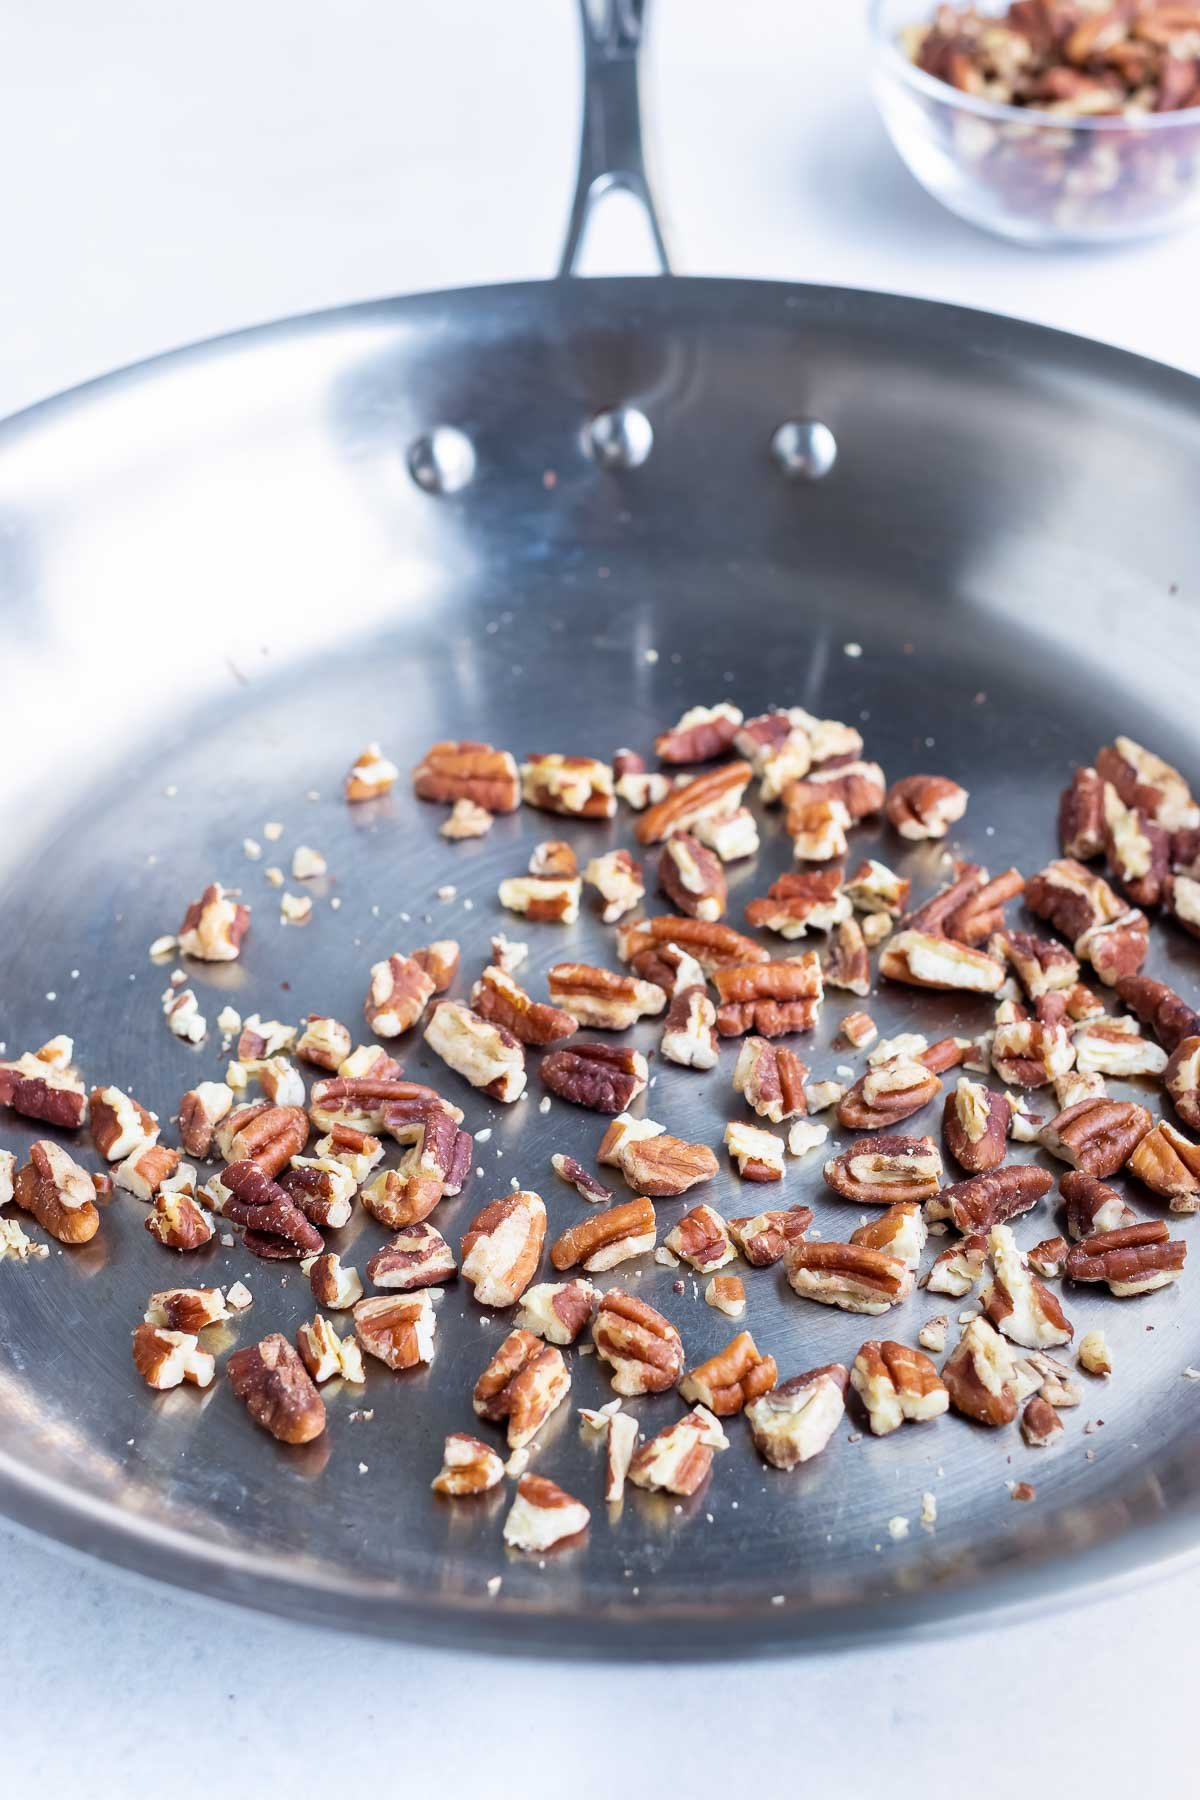 Pecans are toasted in a pan.